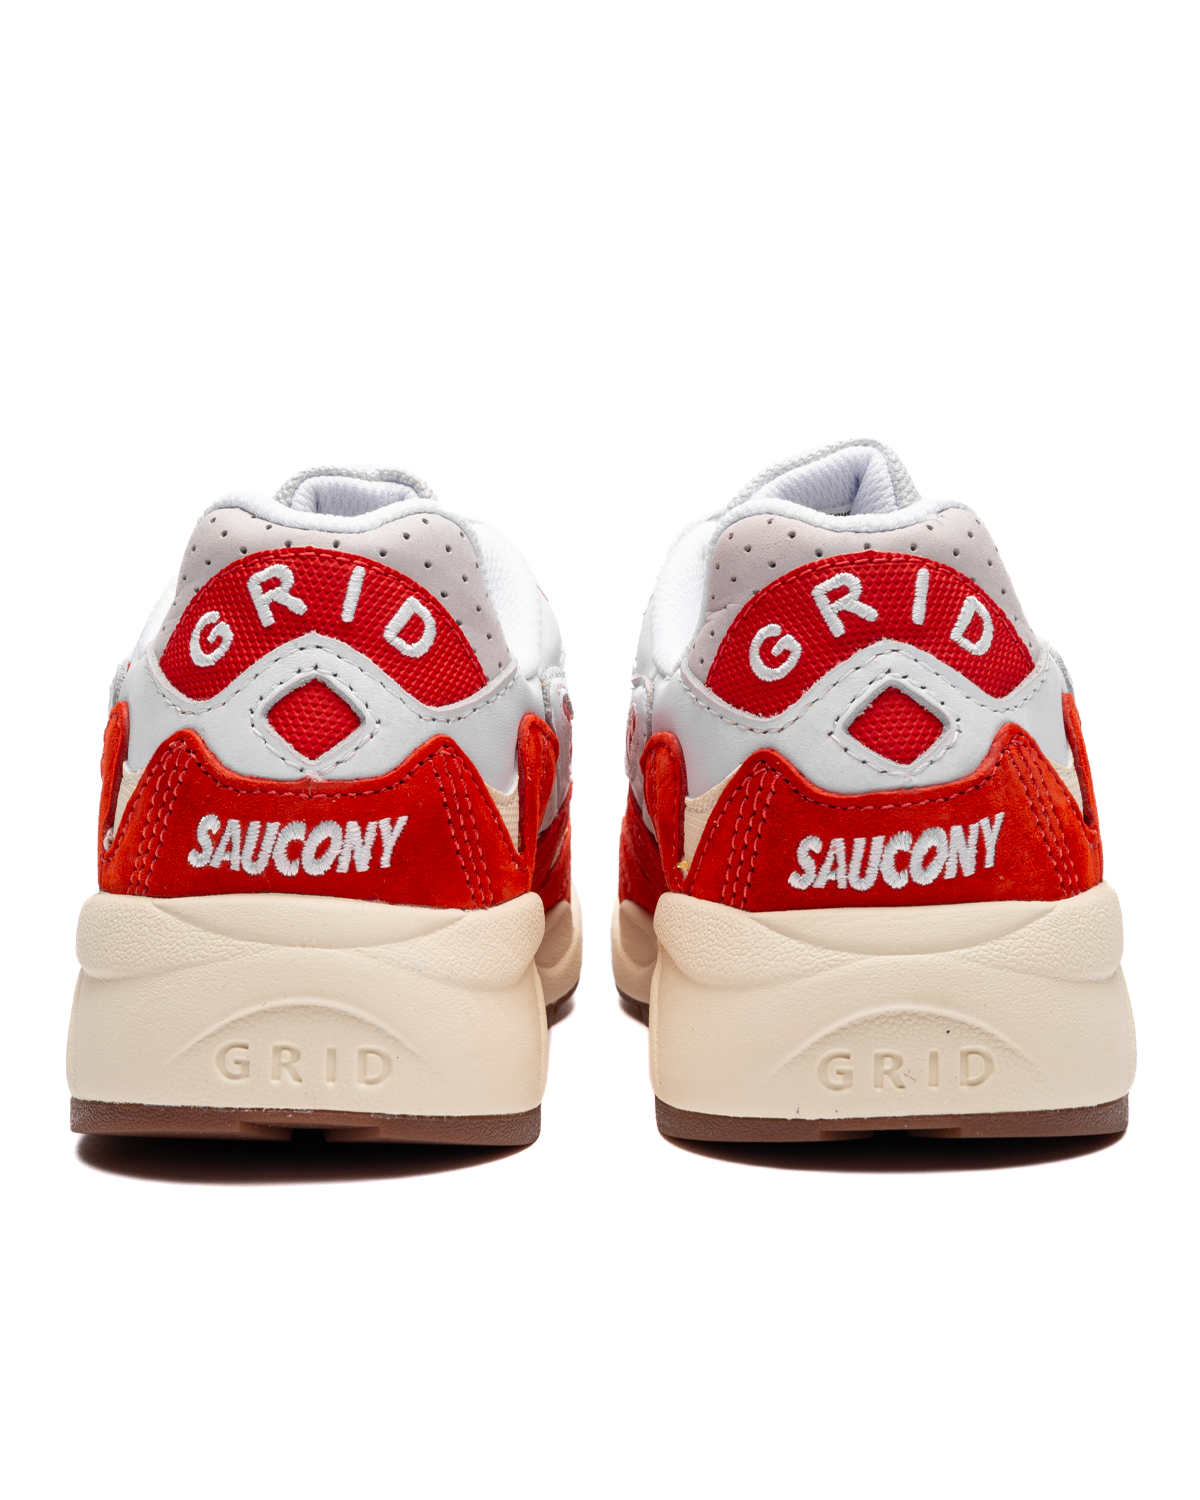 Grid Shadow 2 White/Red